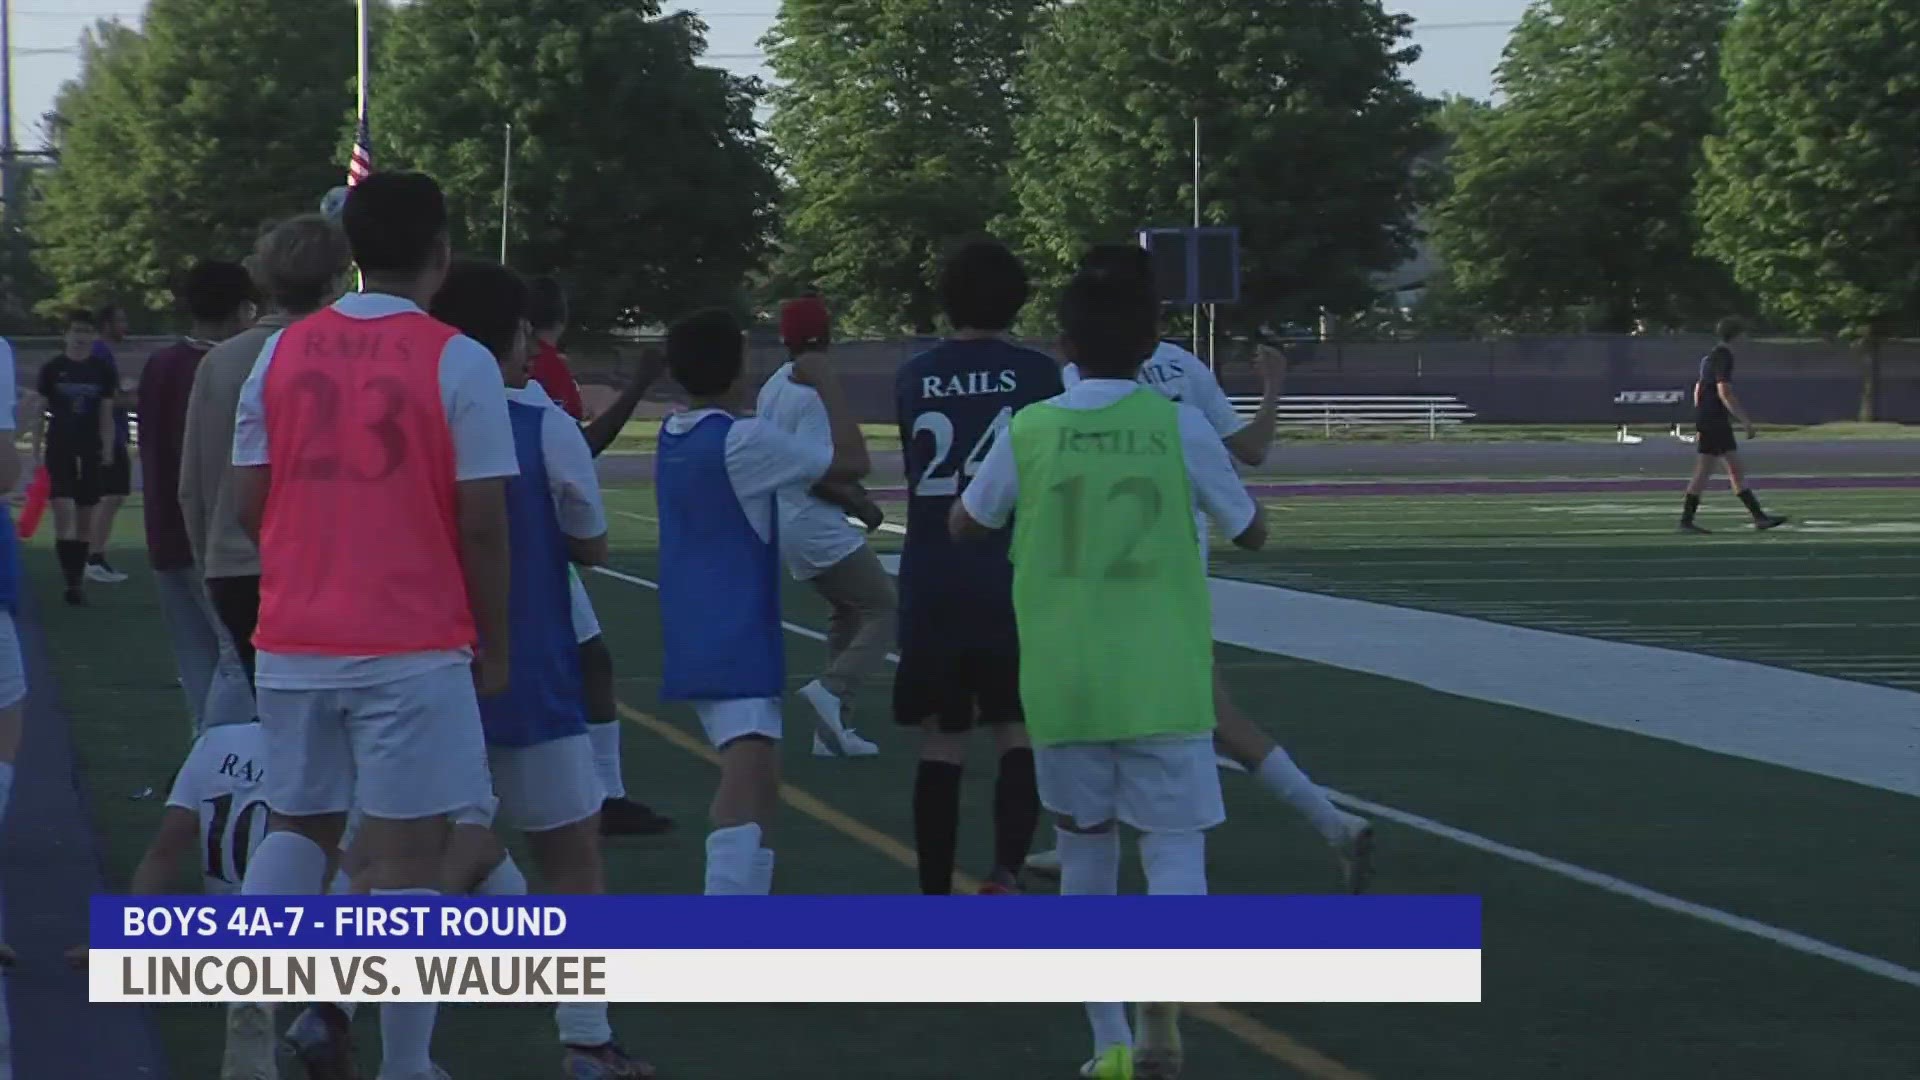 The Railsplitters marched on in the post-season, defeating Waukee 2-1.